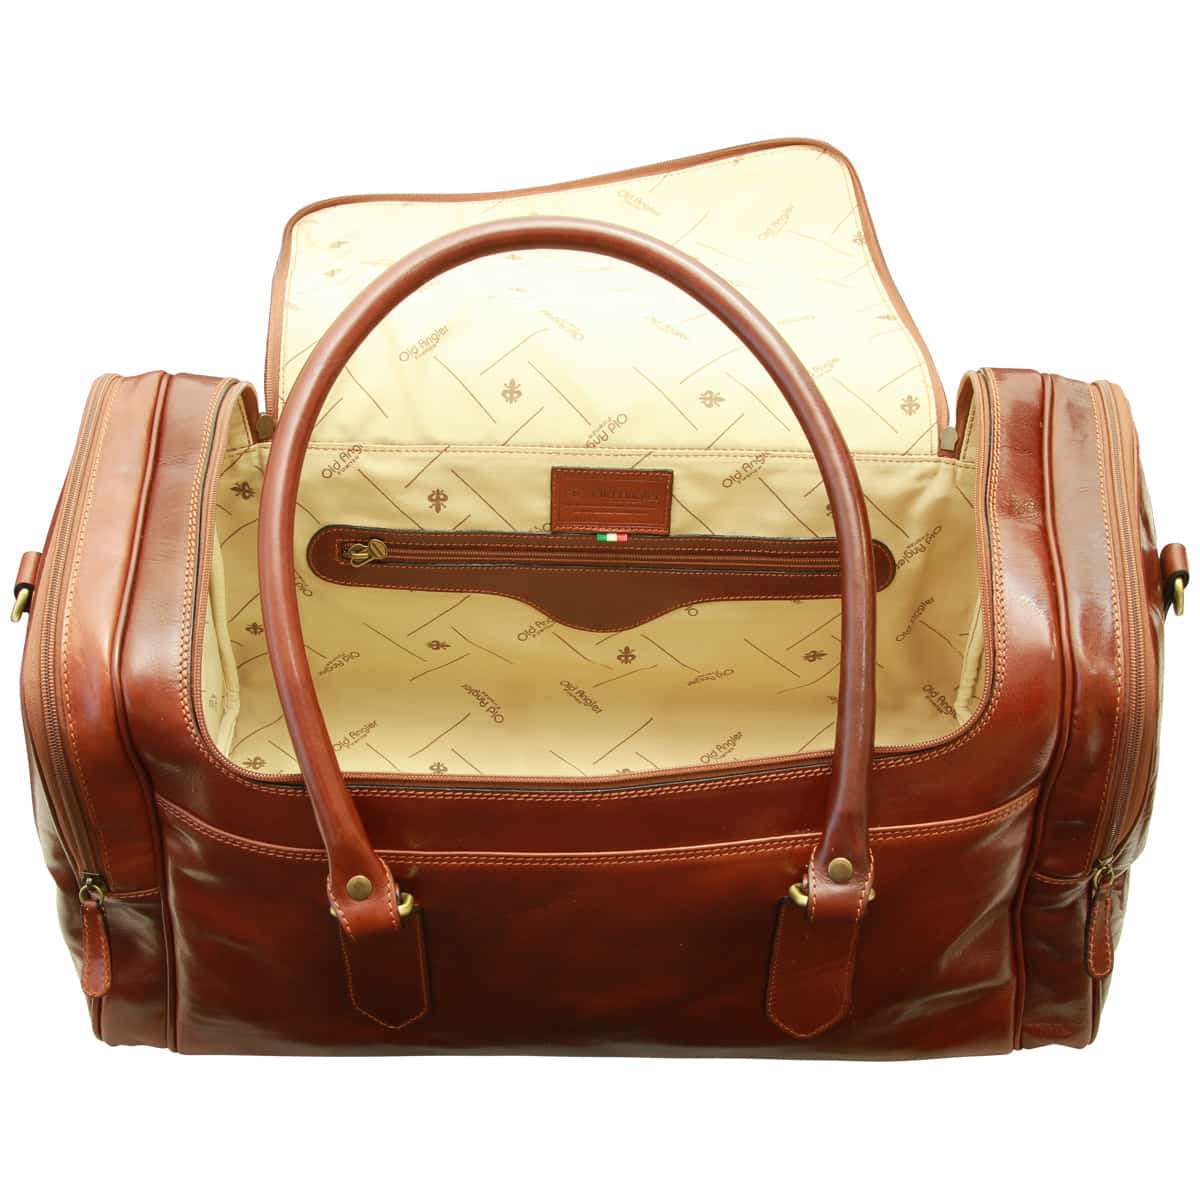 Arno Leather Travel Bag - Brown | 077805MA | EURO | Old Angler Firenze